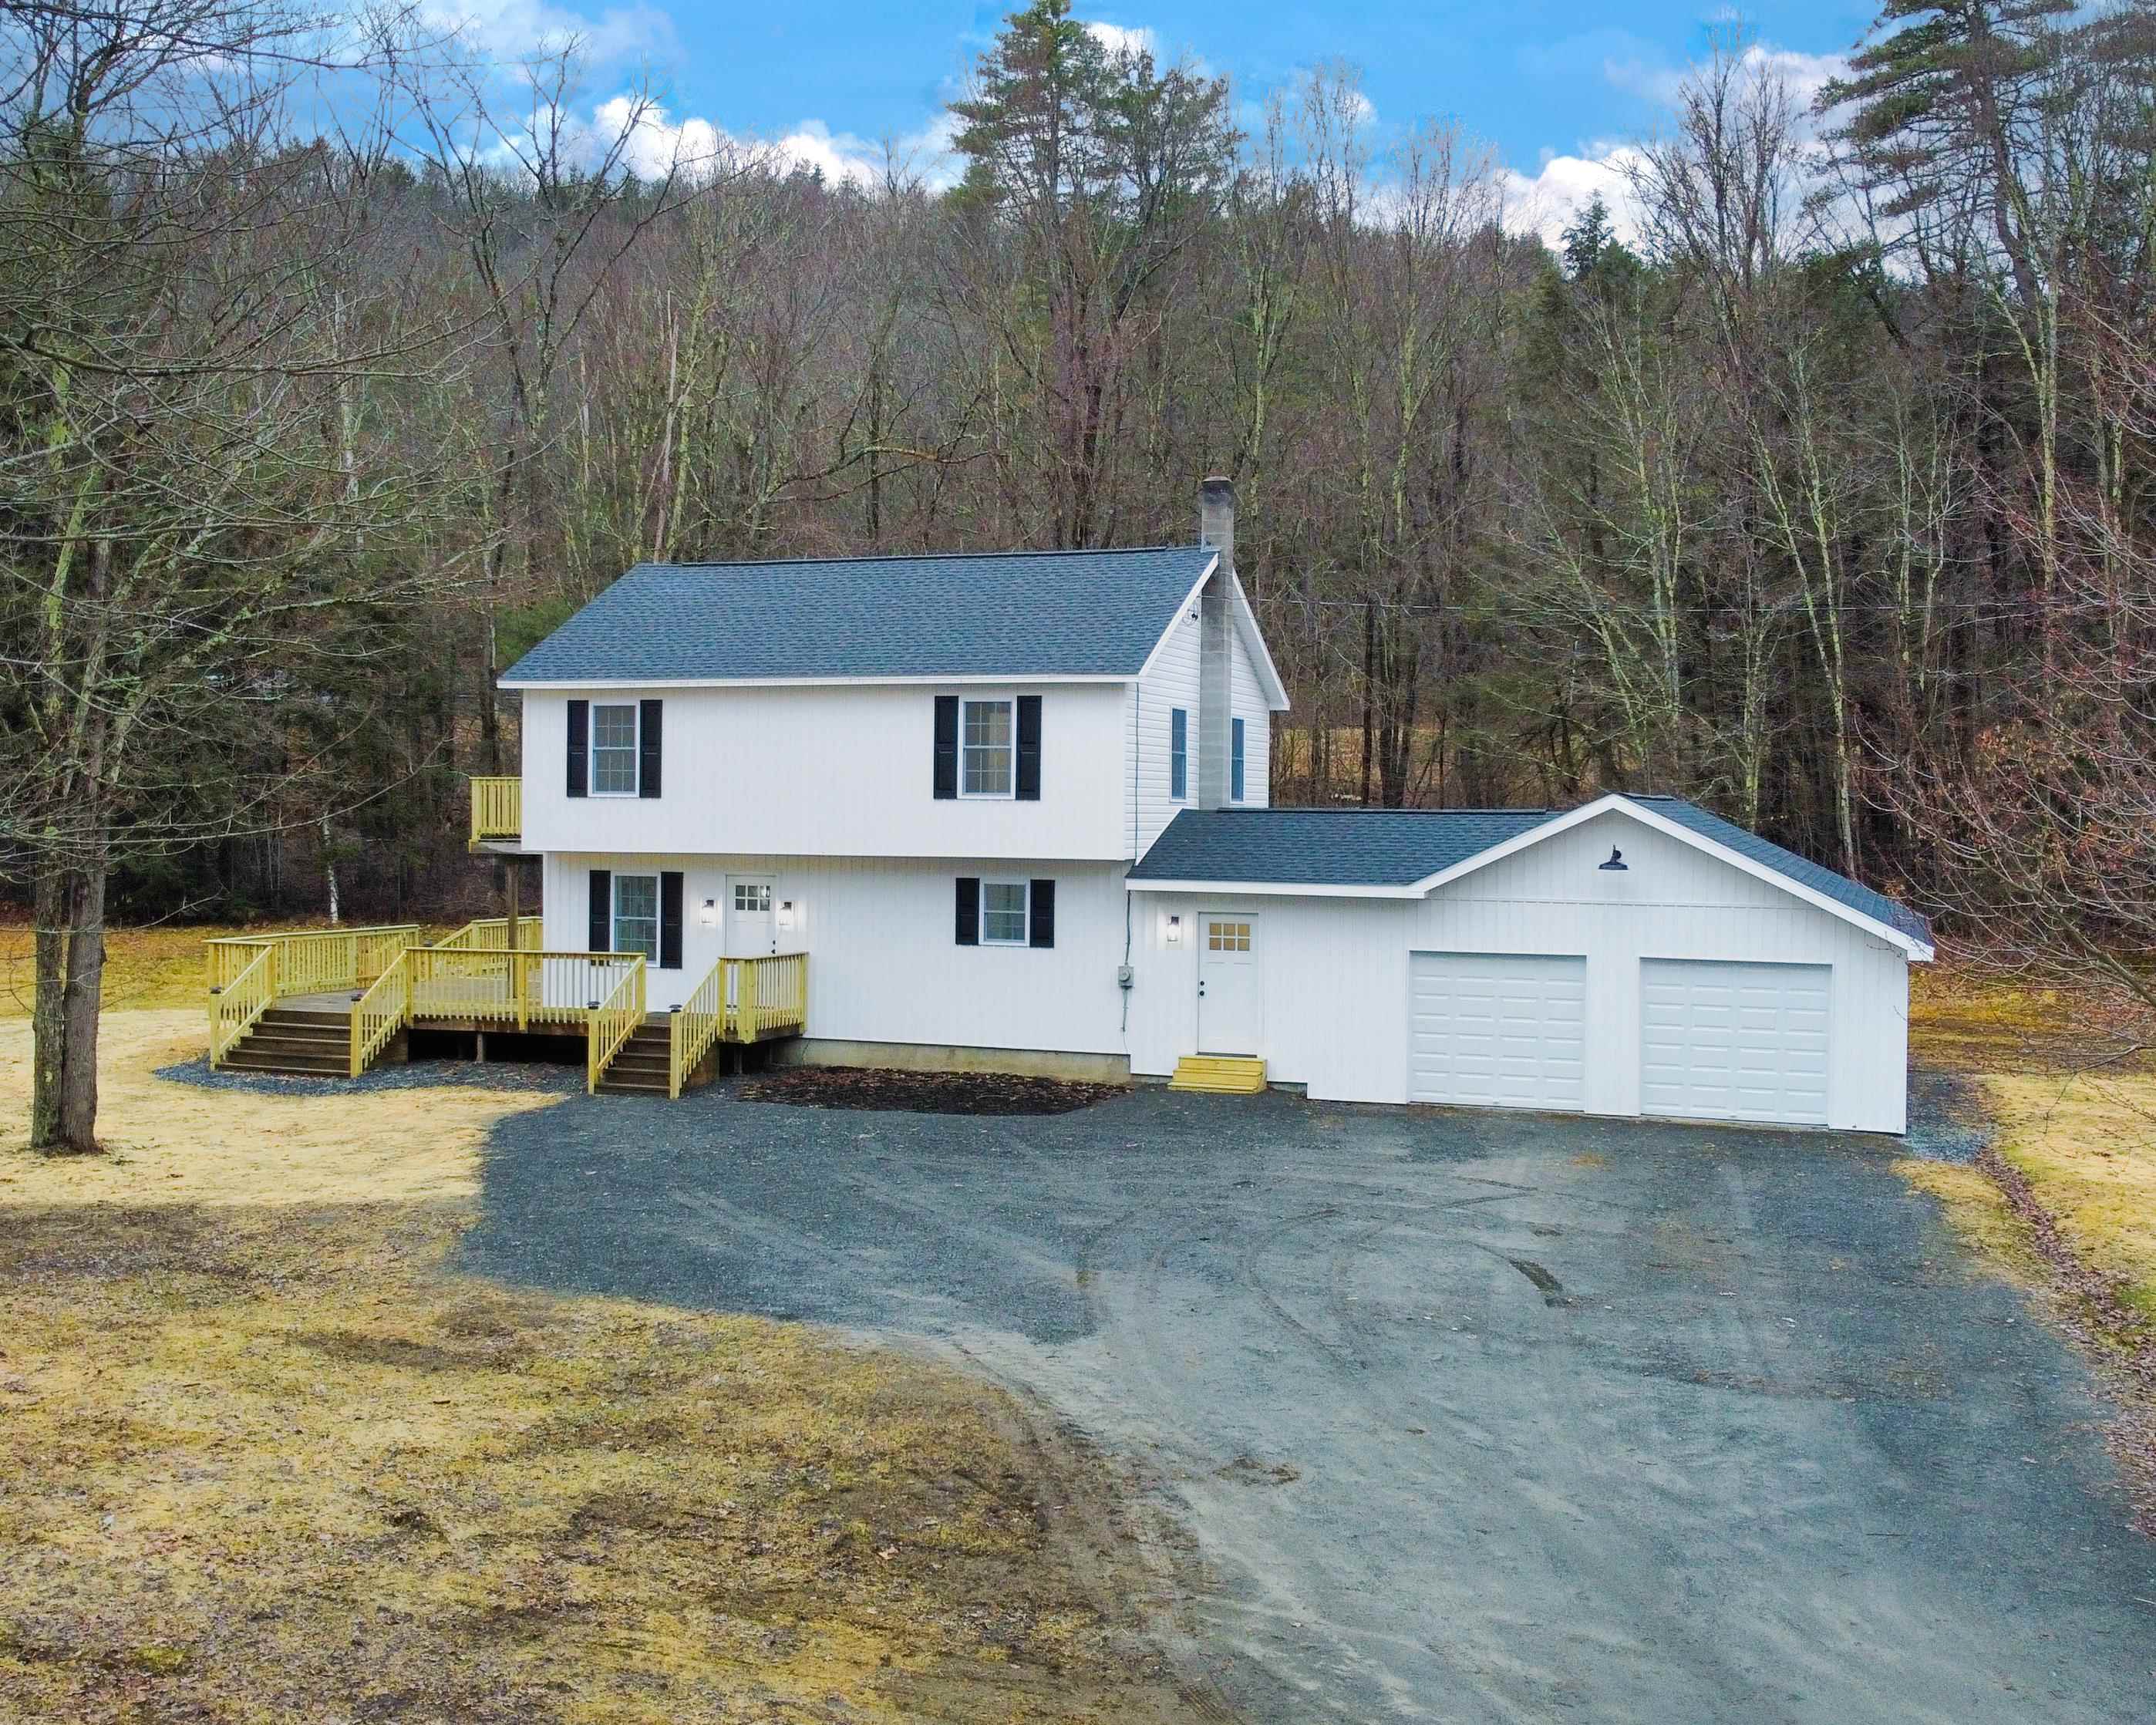 VILLAGE OF BELLOWS FALLS IN TOWN OF ROCKINGHAM VT Homes for sale